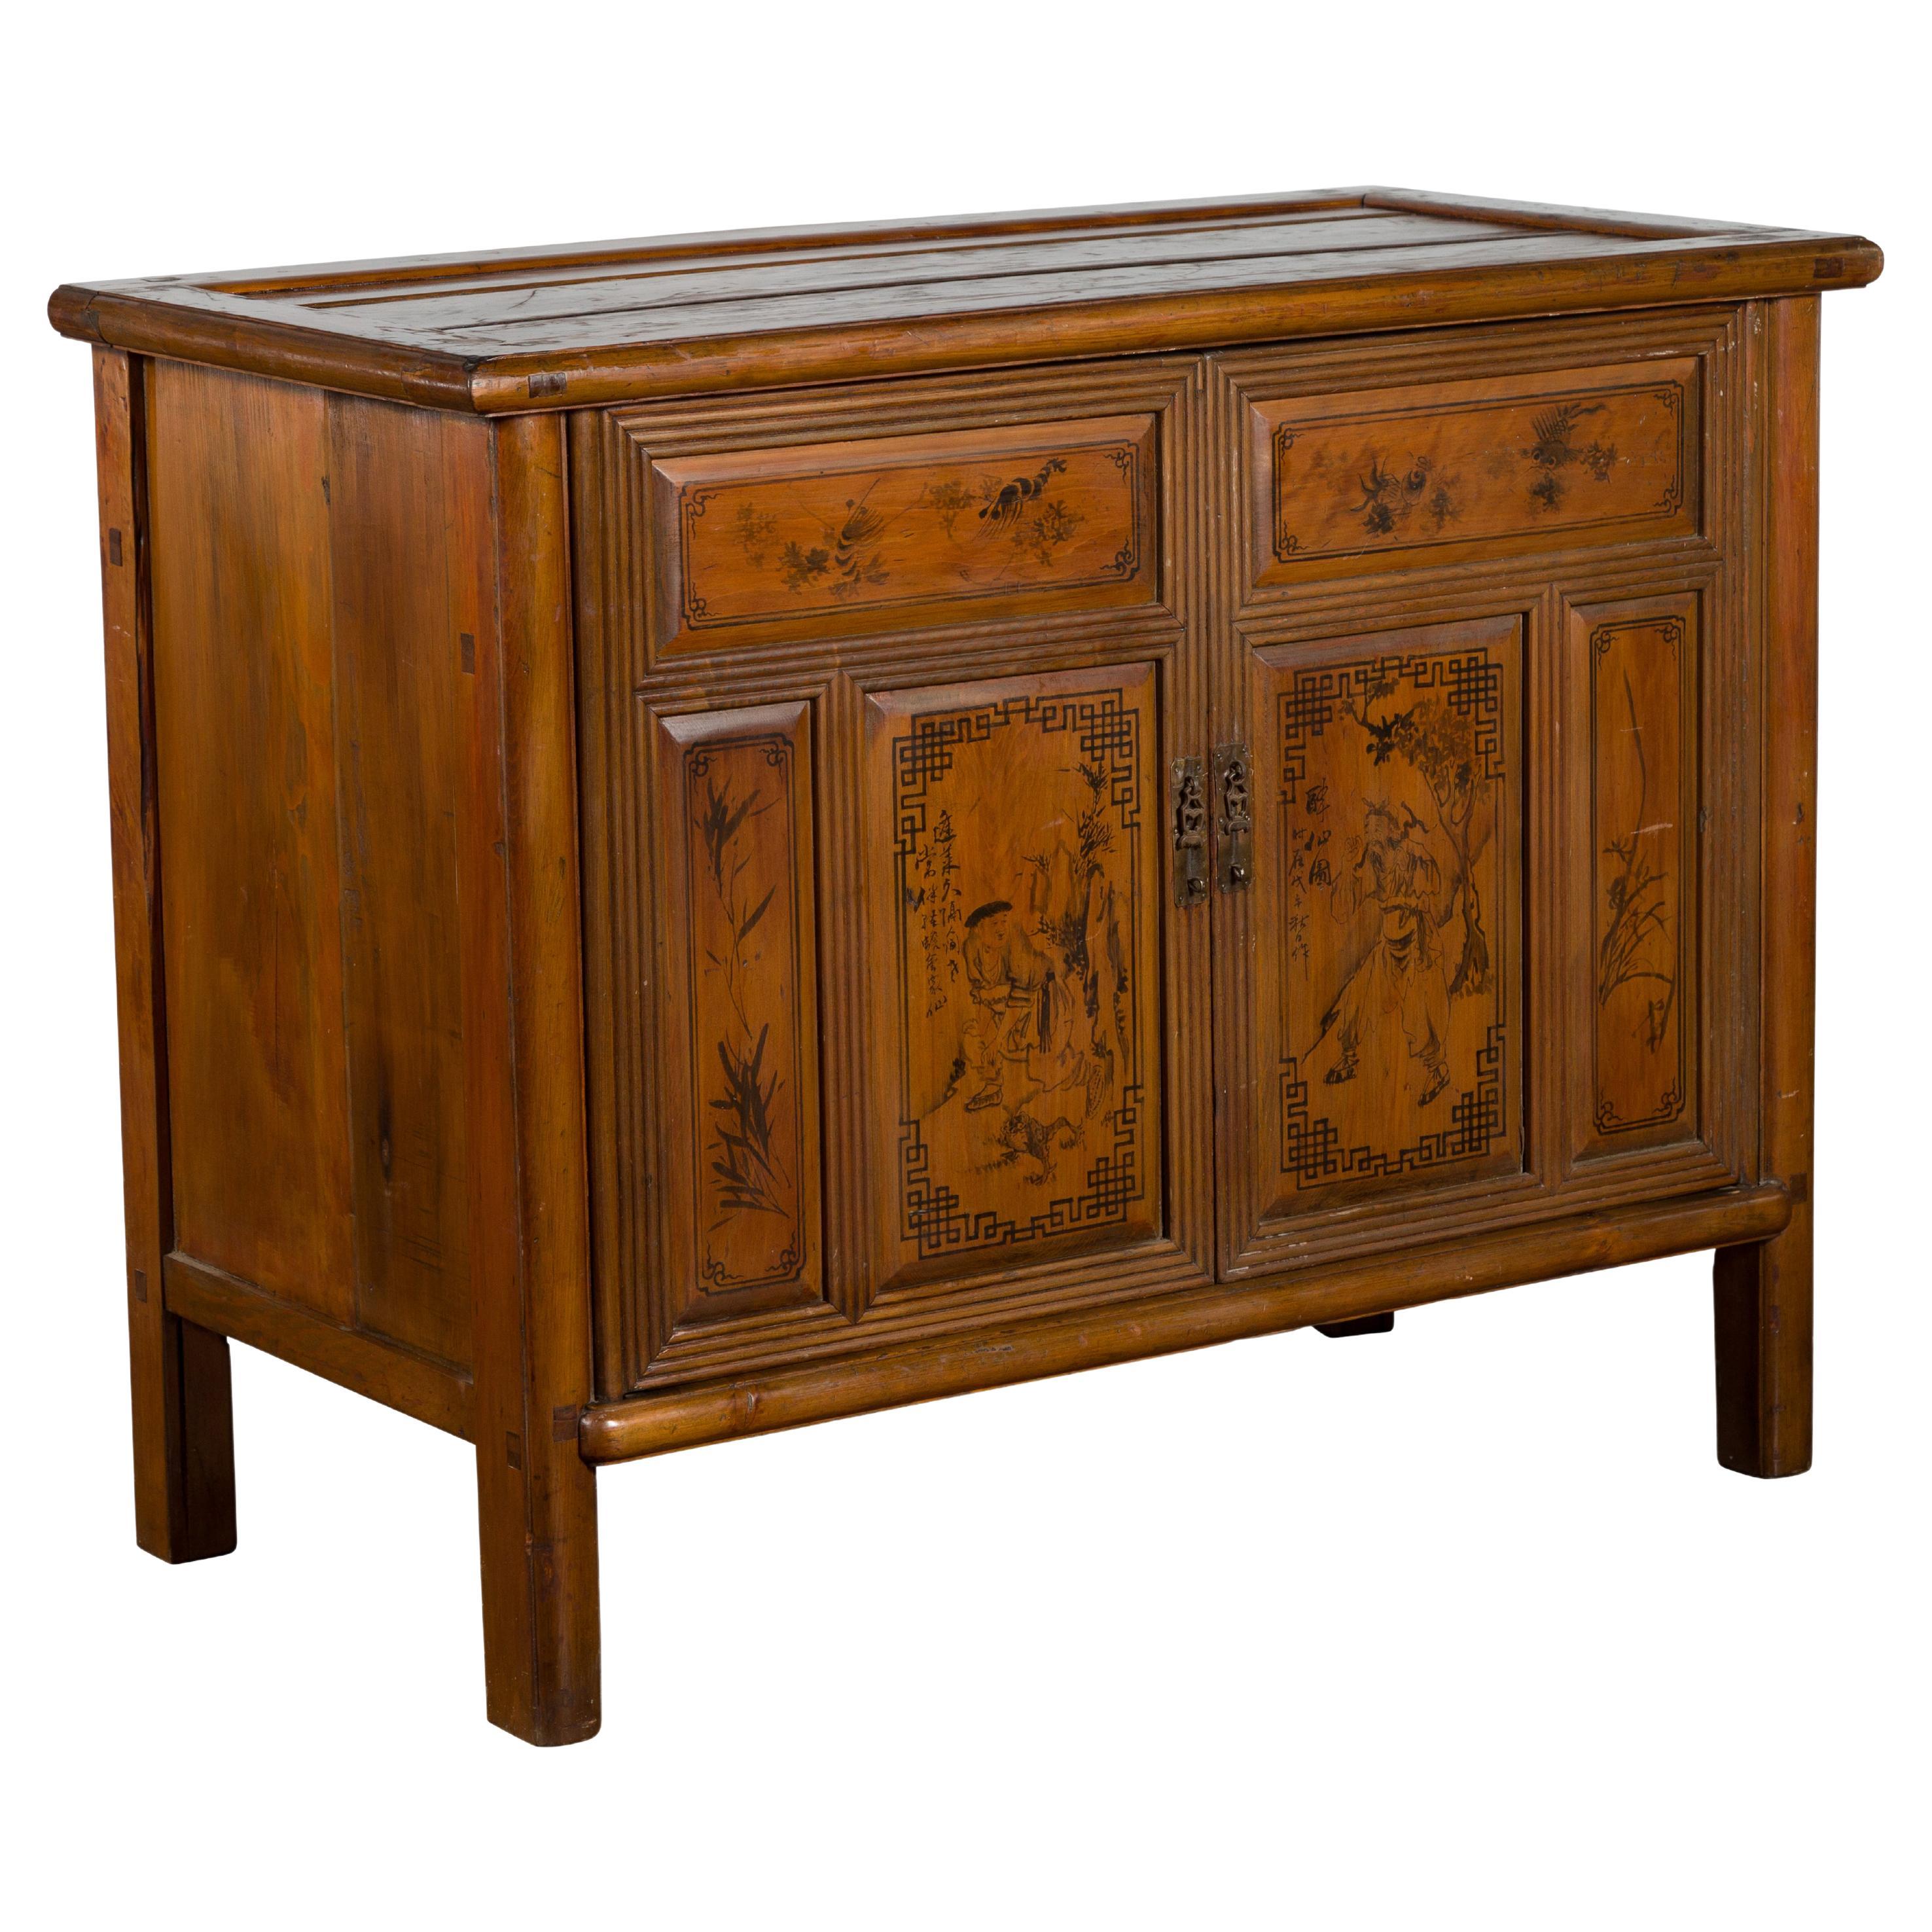 Chinese Early 20th Century Cabinet with Hand-Painted Décor, Doors and Drawers